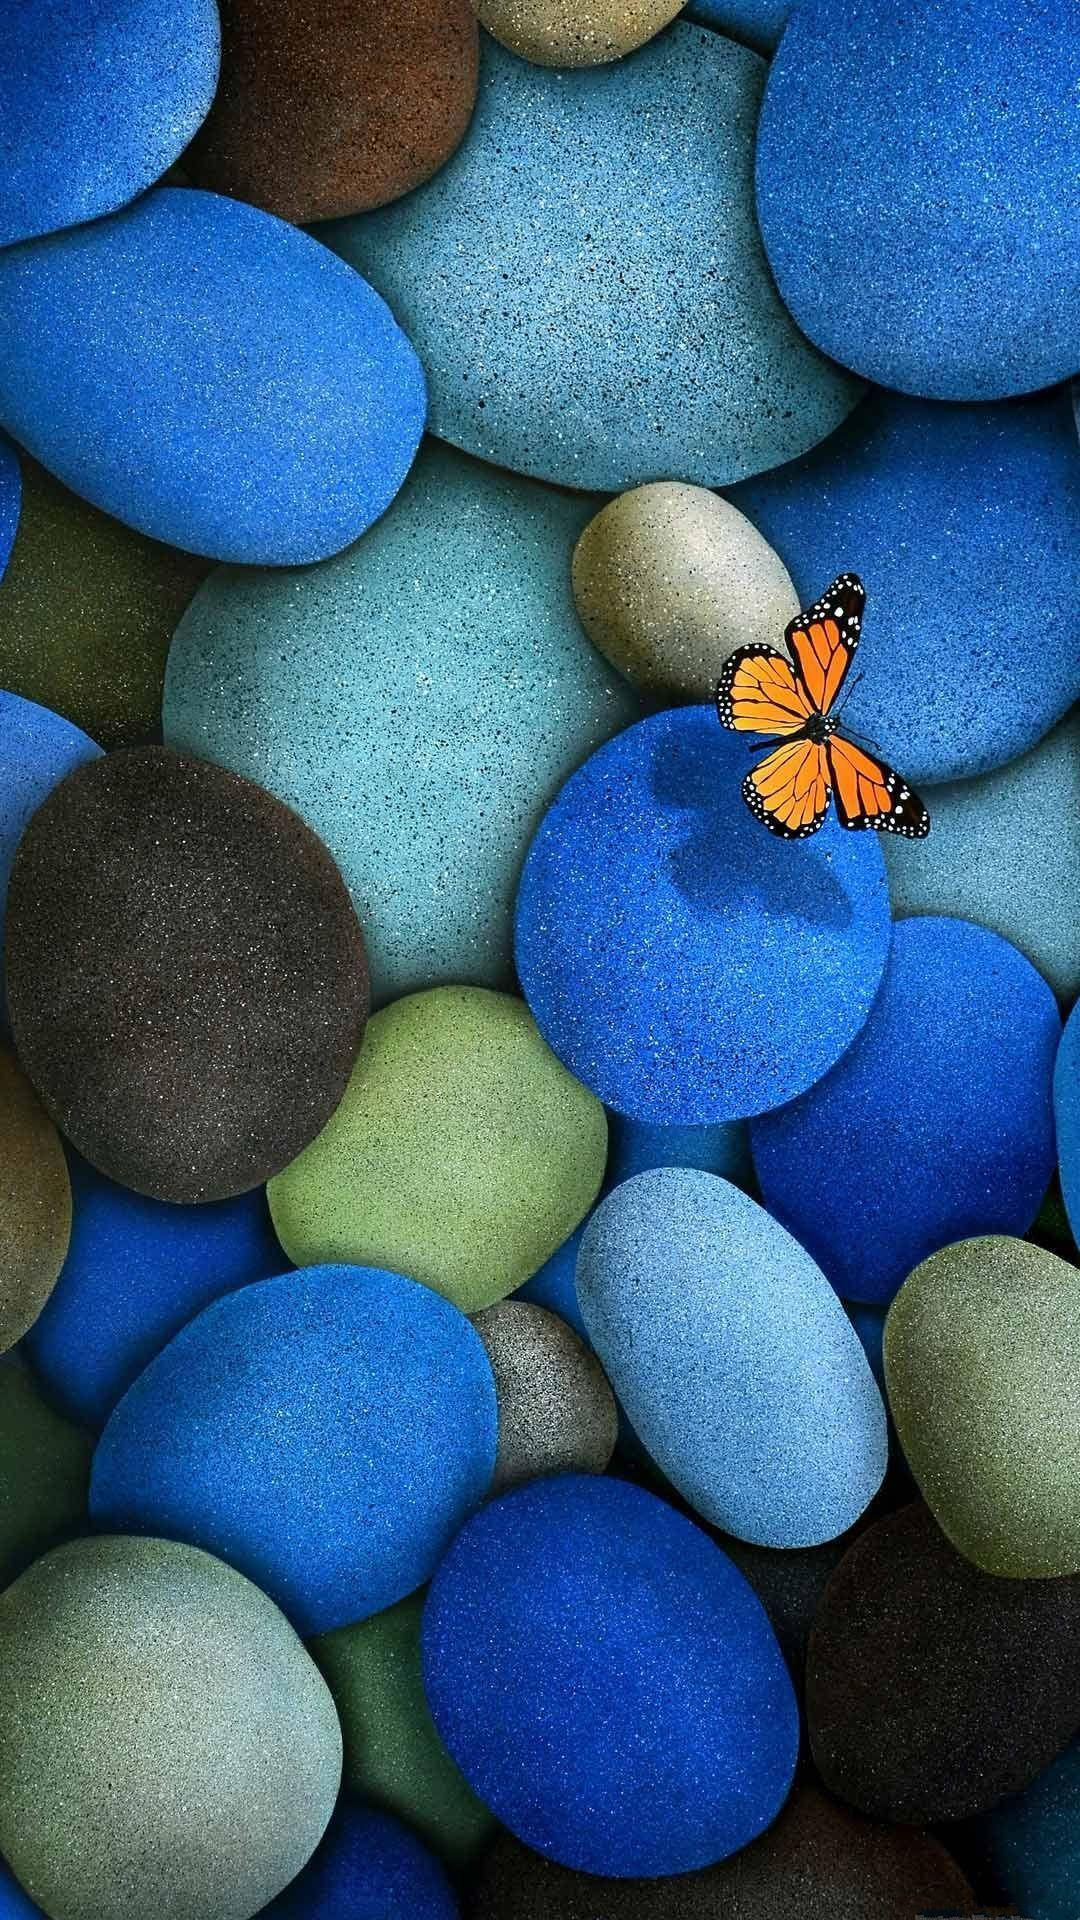 Samsung Galaxy 4k Blue Pebbles And A Butterfly Wallpaper